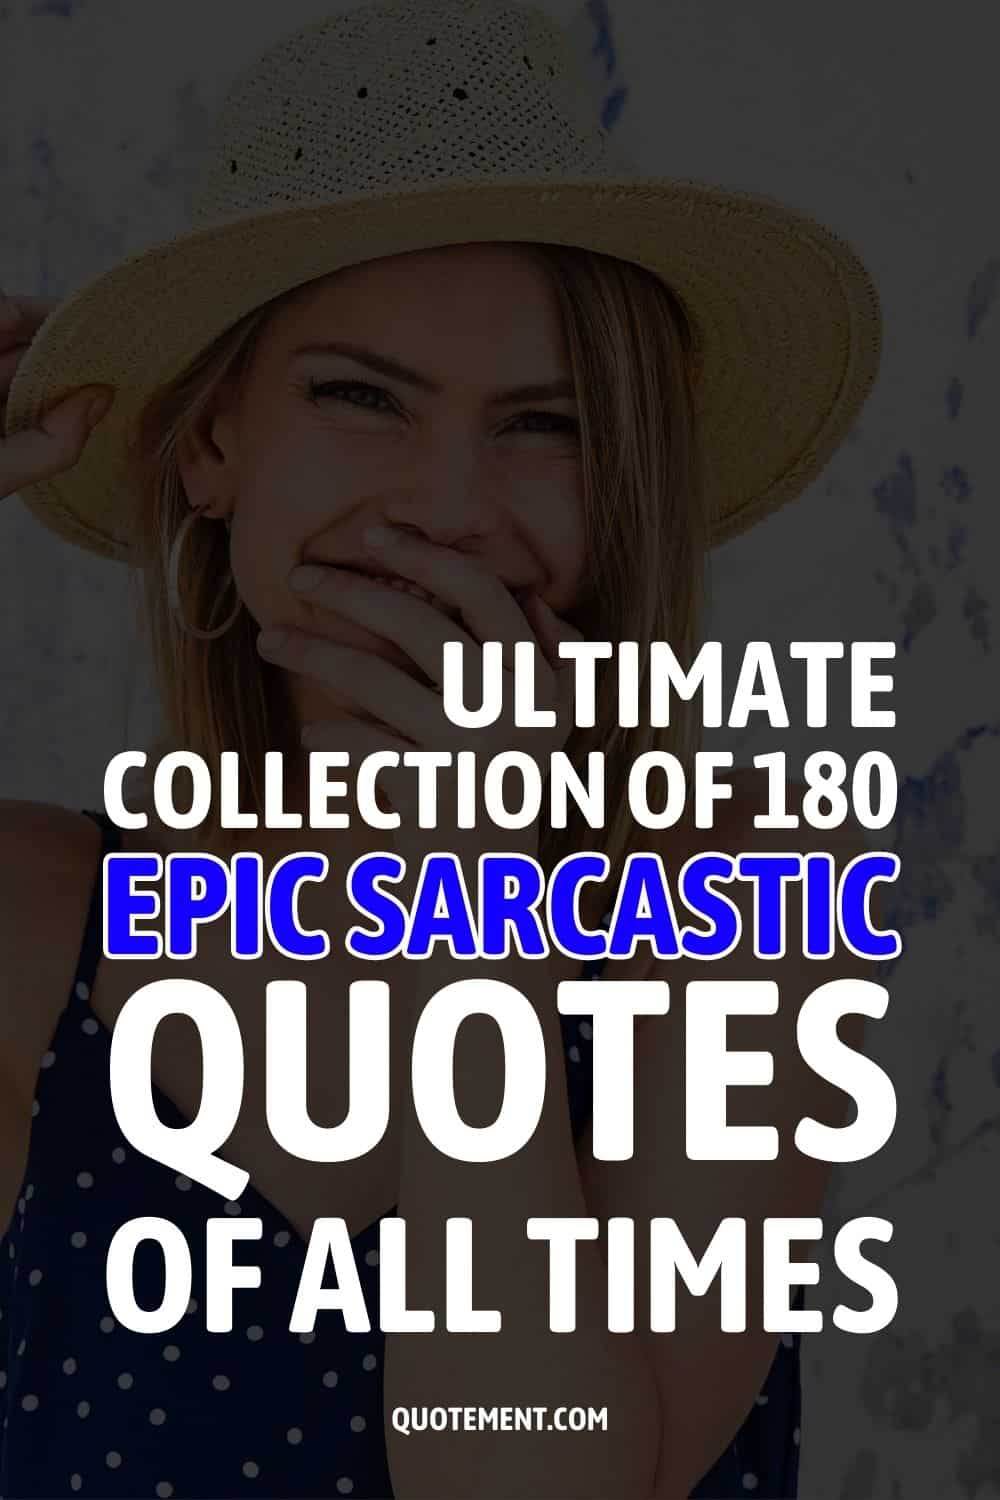 Ultimate Collection Of 180 Epic Sarcastic Quotes Of All Times
